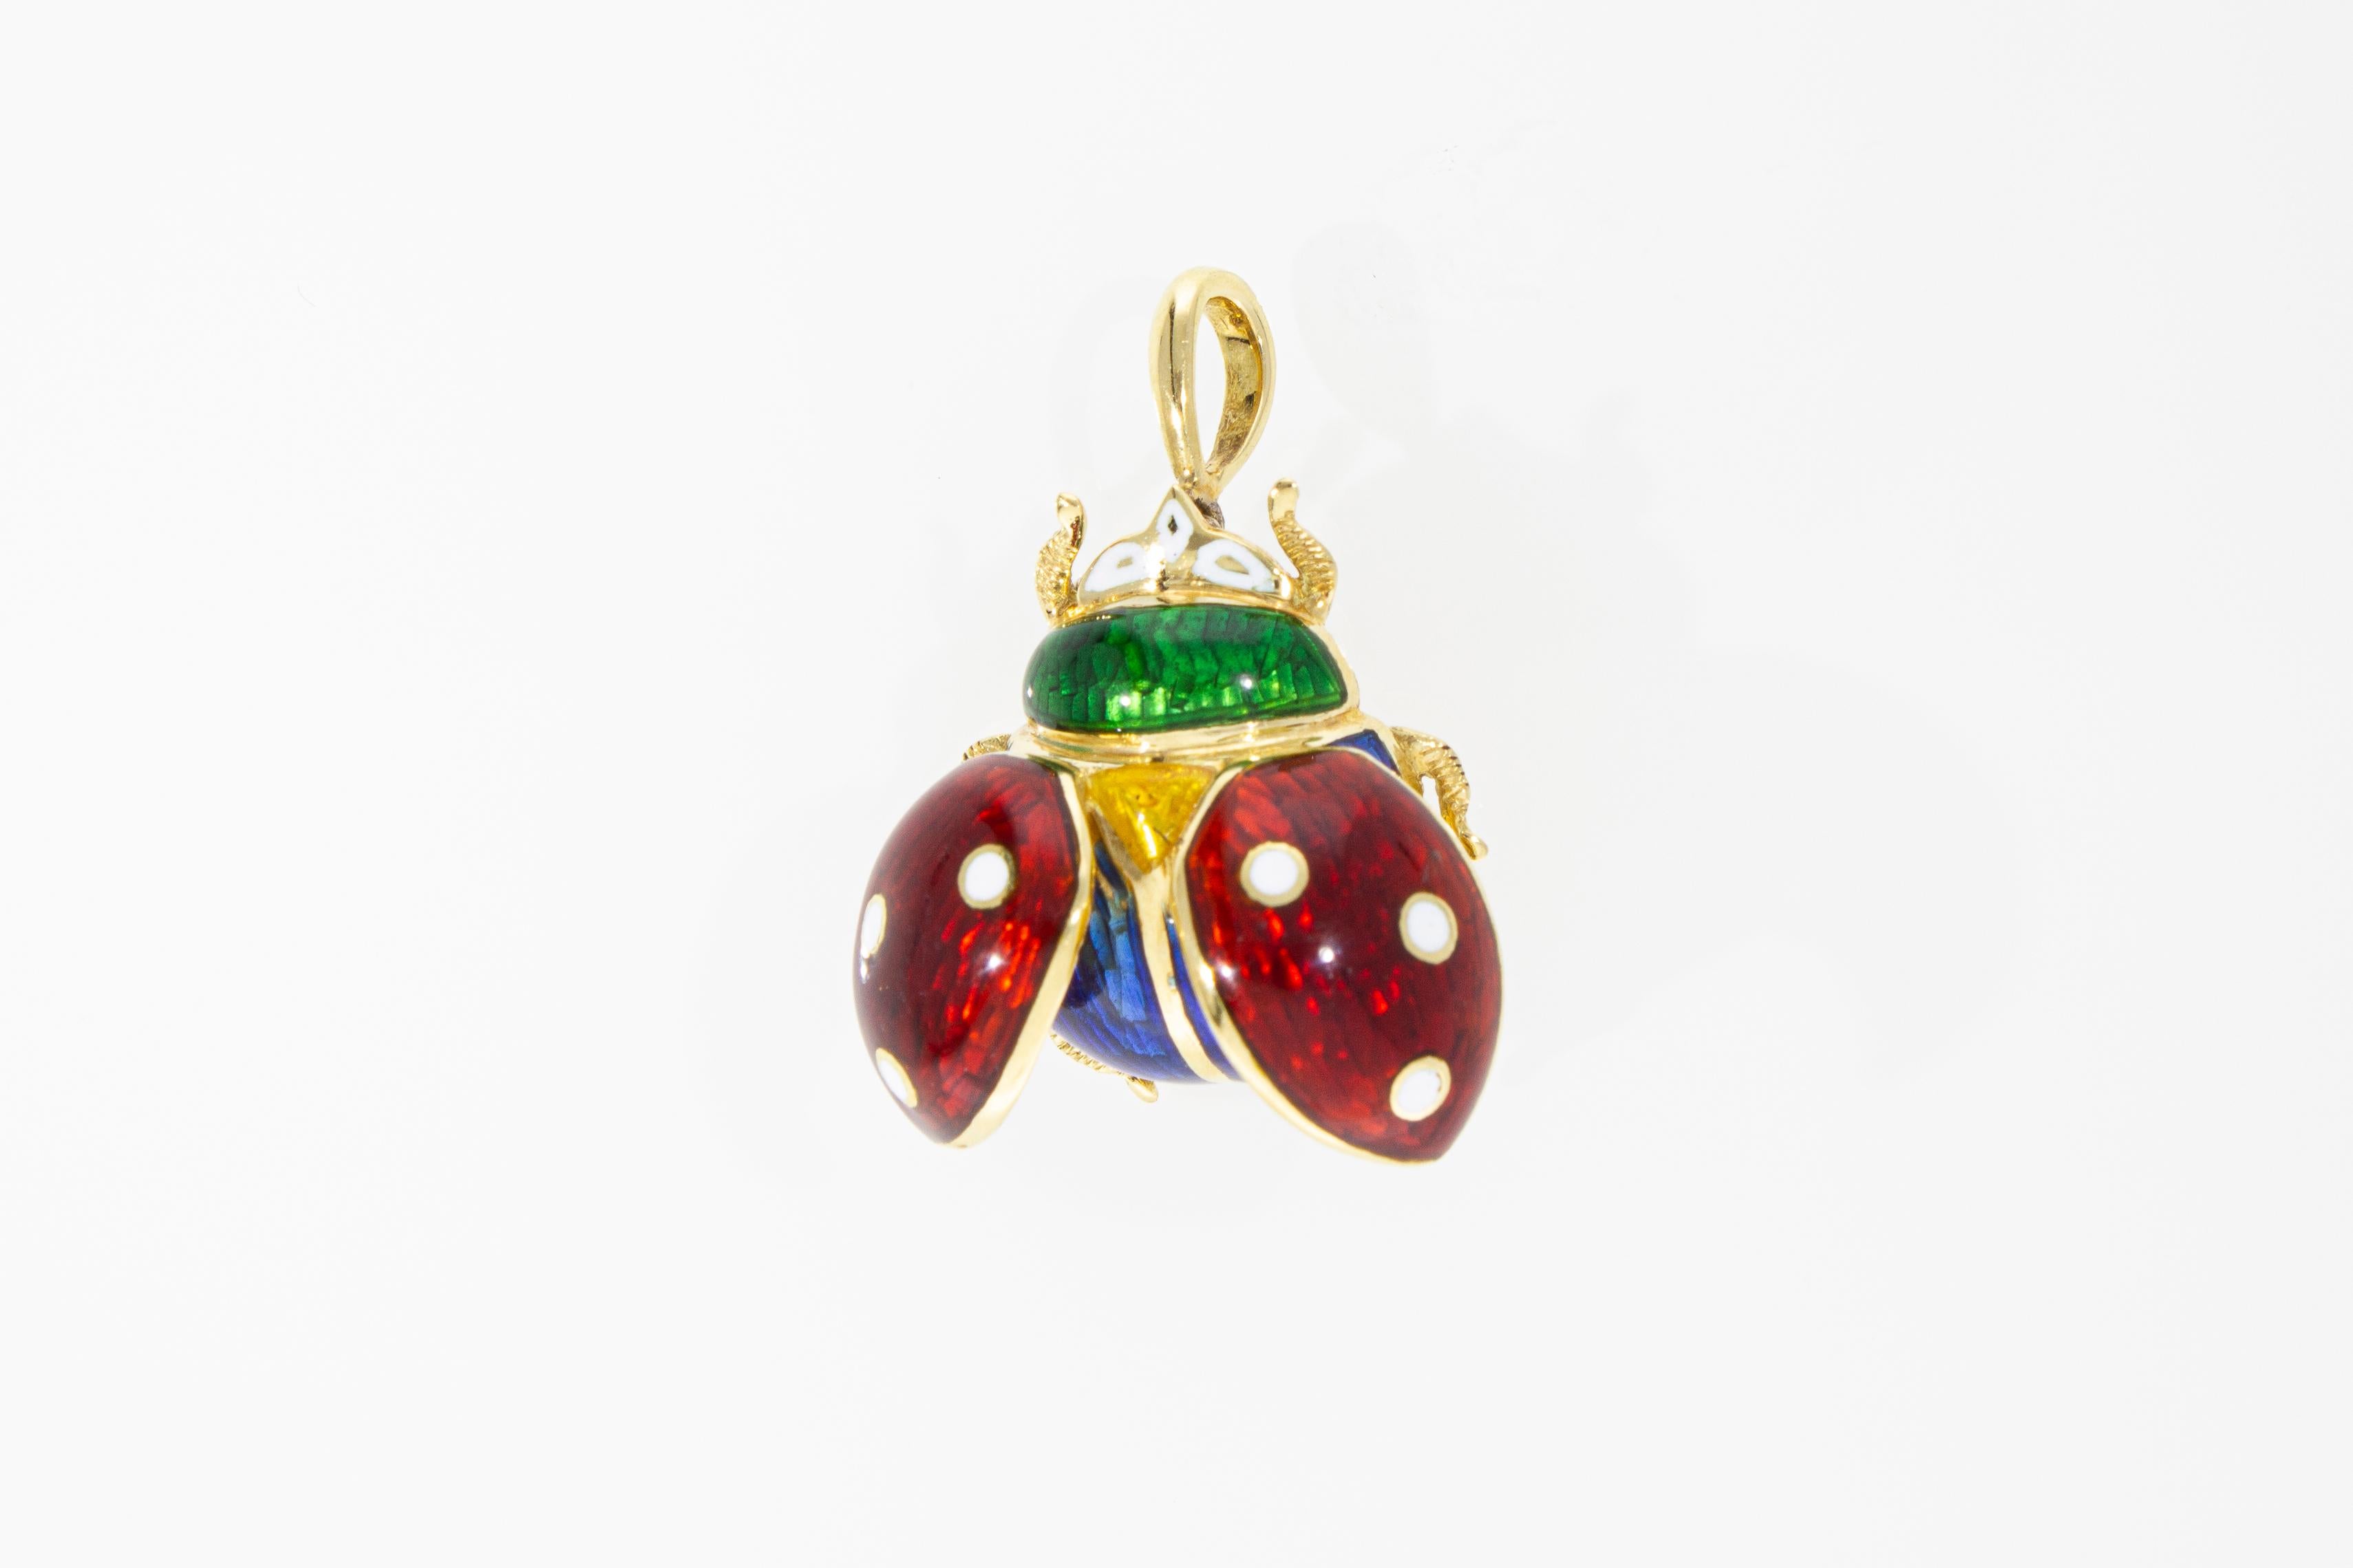 Women's or Men's Ladybug-Shaped Pendant and Brooch with Enamel of Various Colors For Sale